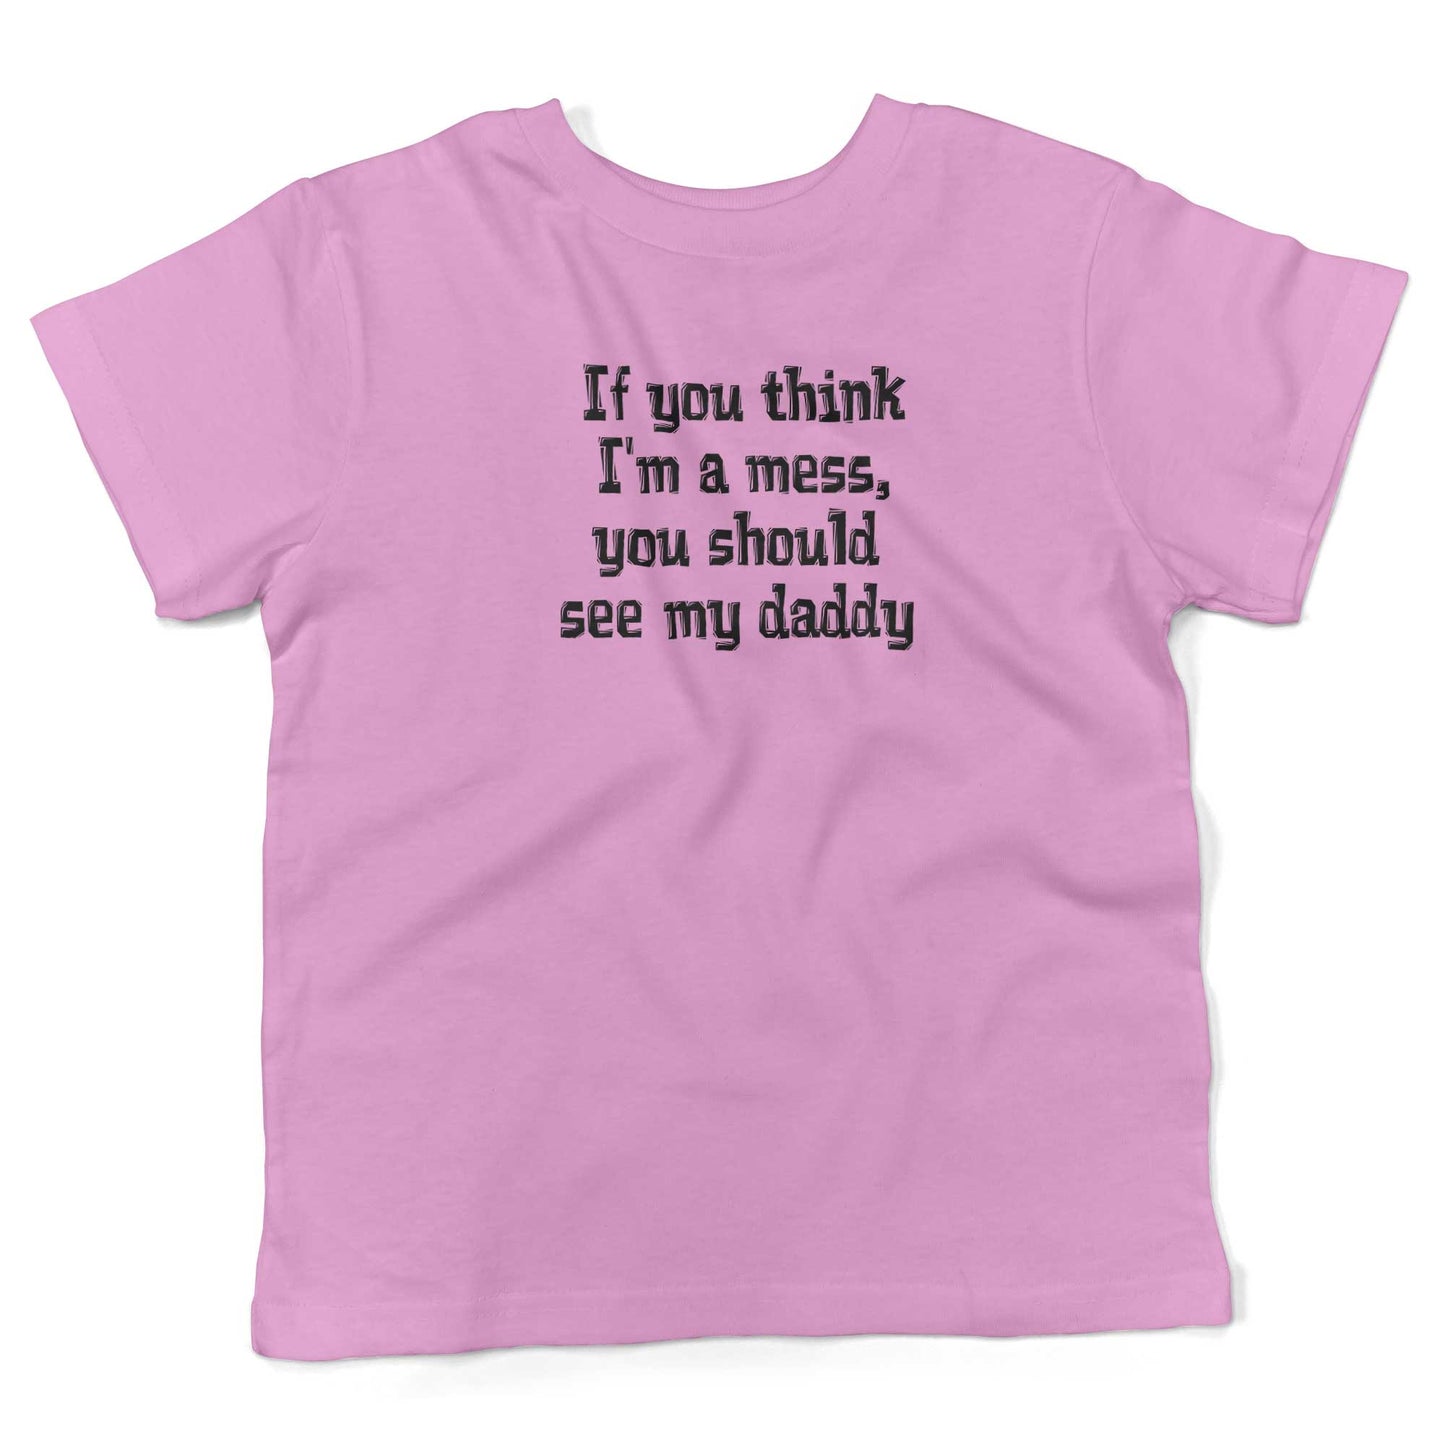 If You Think I'm A Mess, You Should See My Daddy Toddler Shirt-Organic Pink-2T